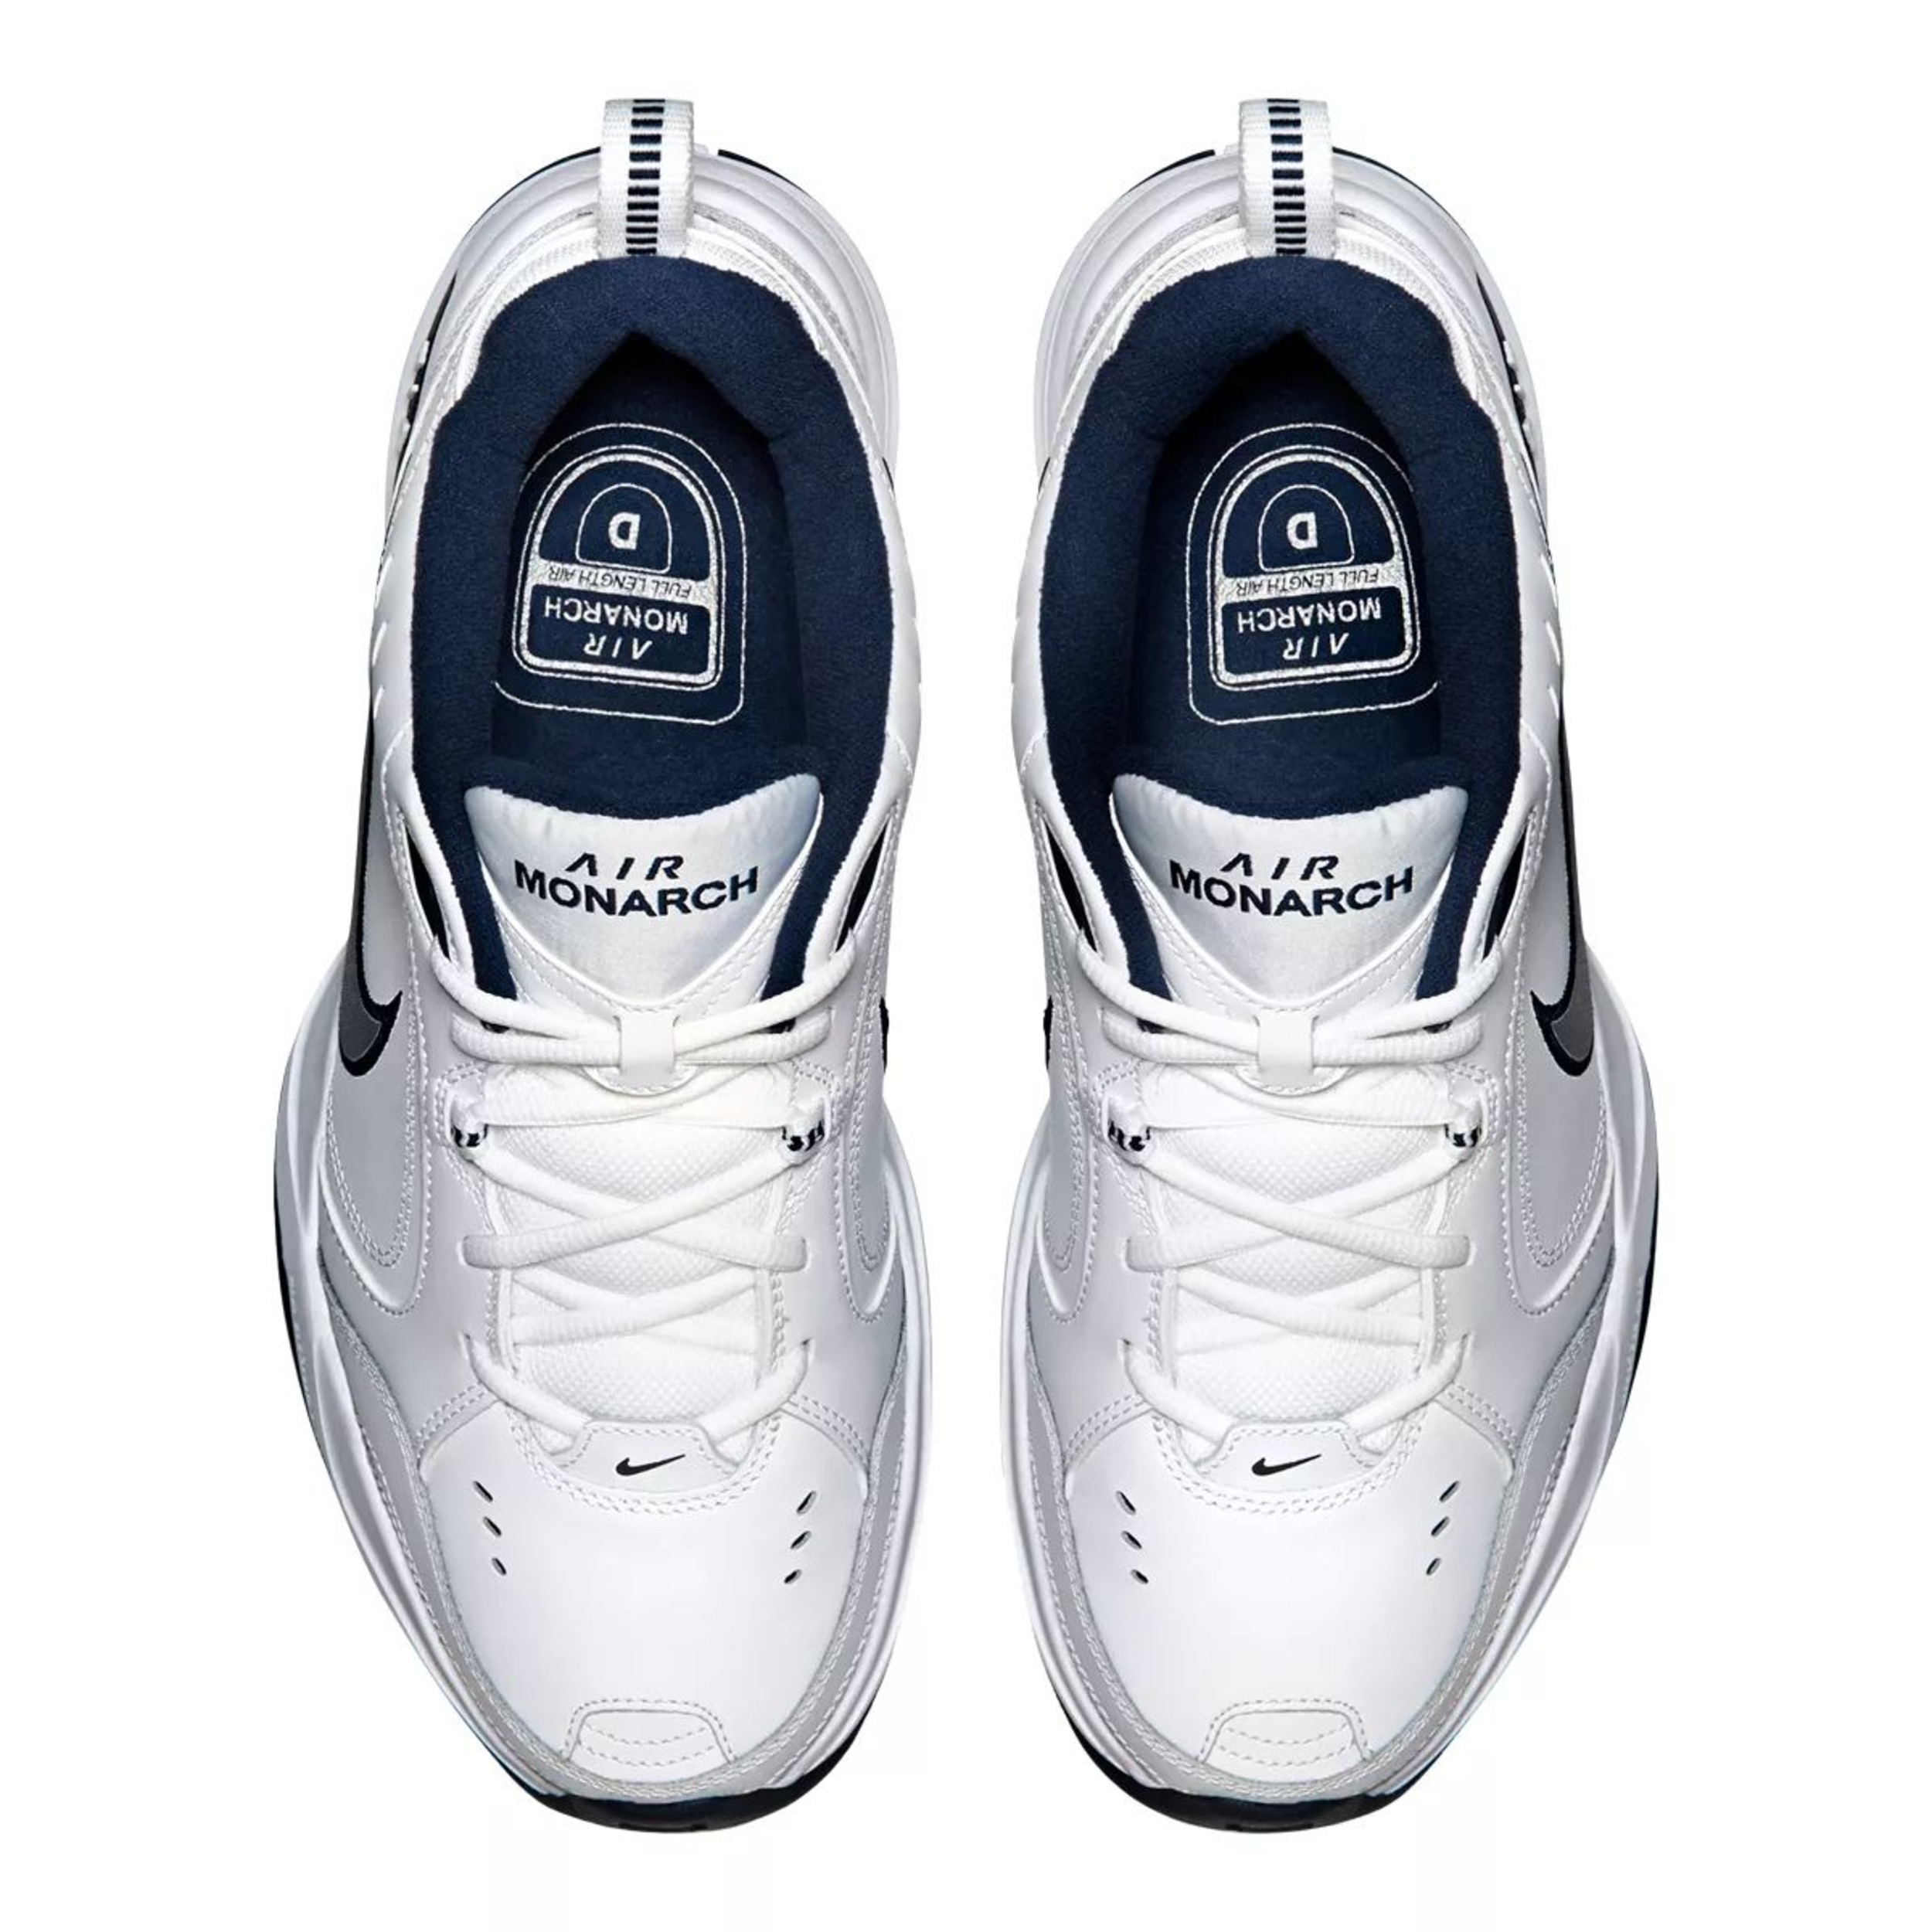 Nike Men's Air Monarch IV Training Shoes, Cushioned, Lightweight ...